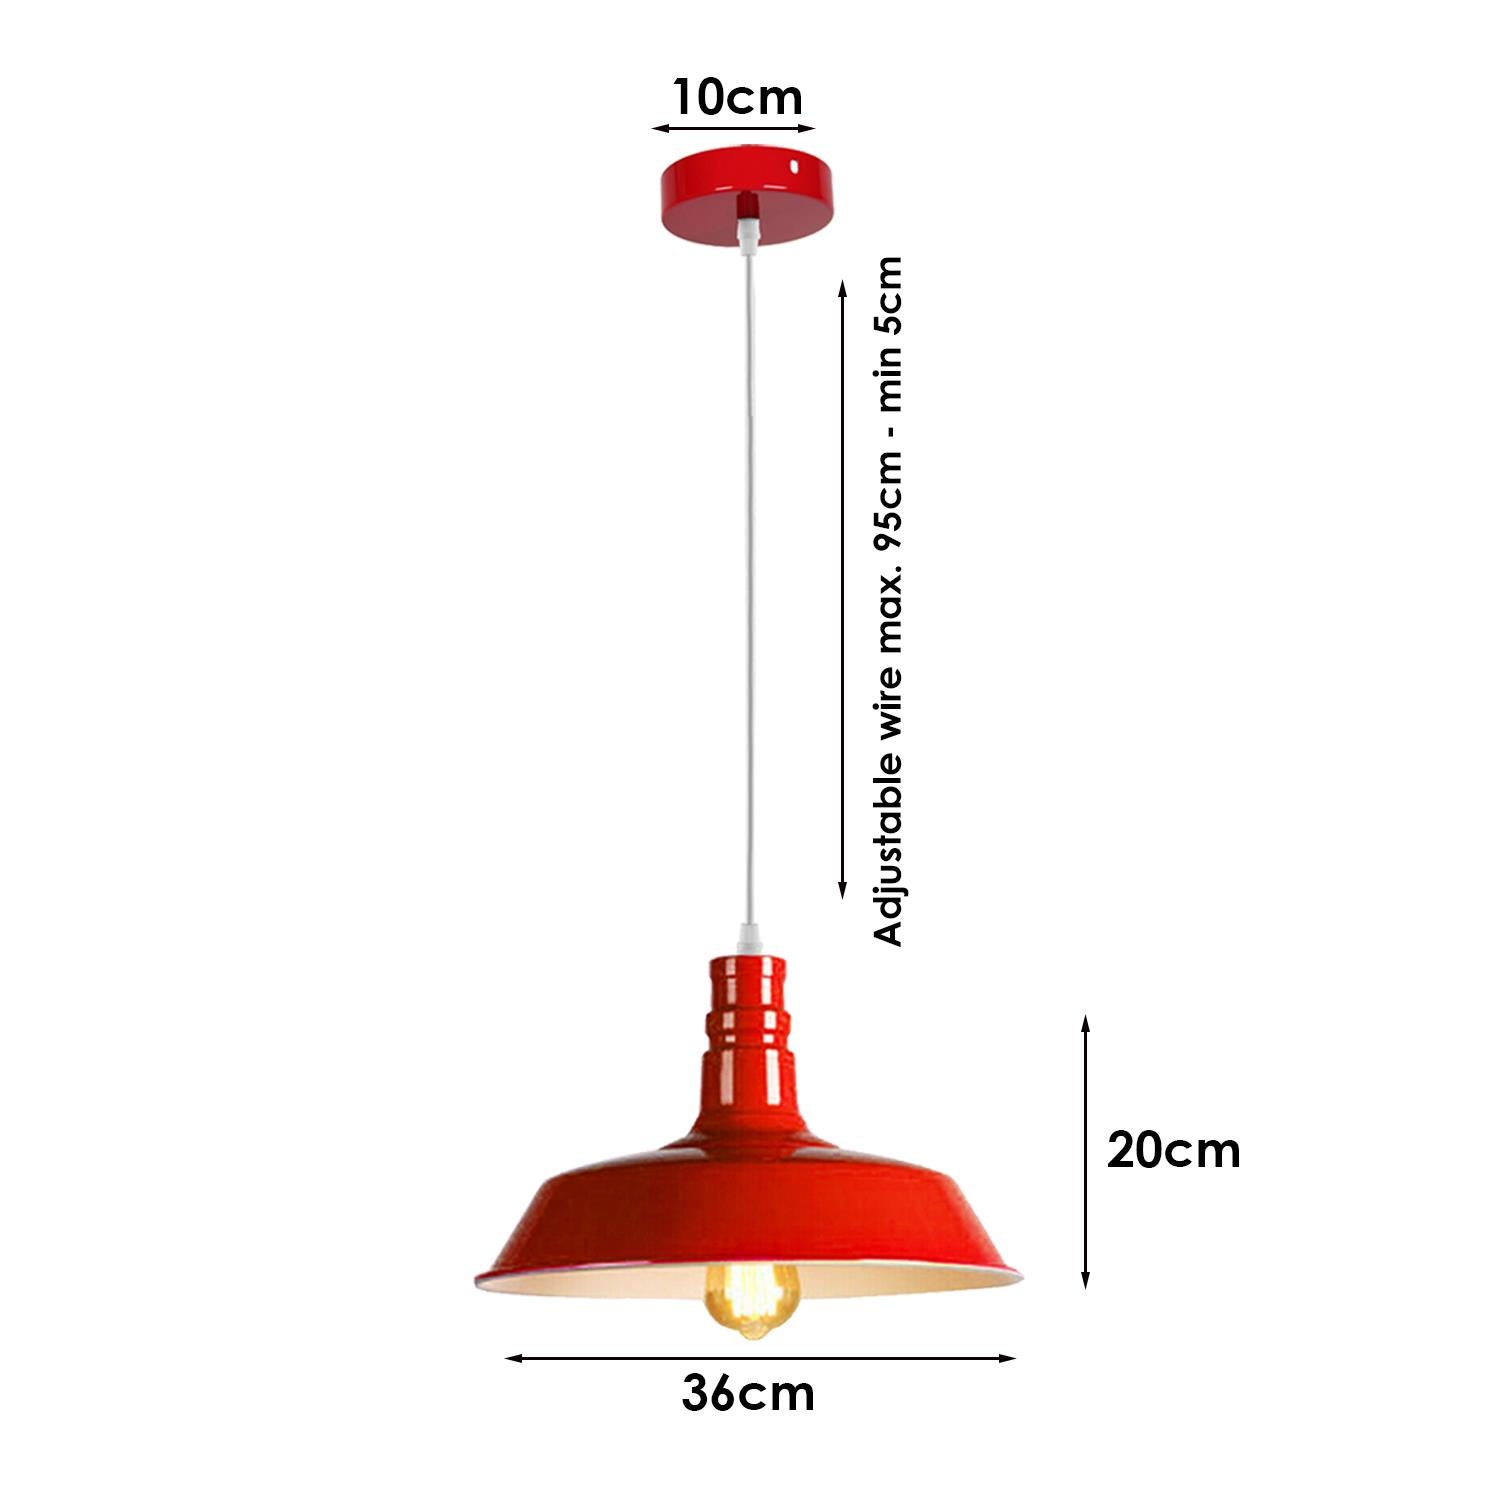 Red Retro Bedroom and Kitchen Pendant Light Shades